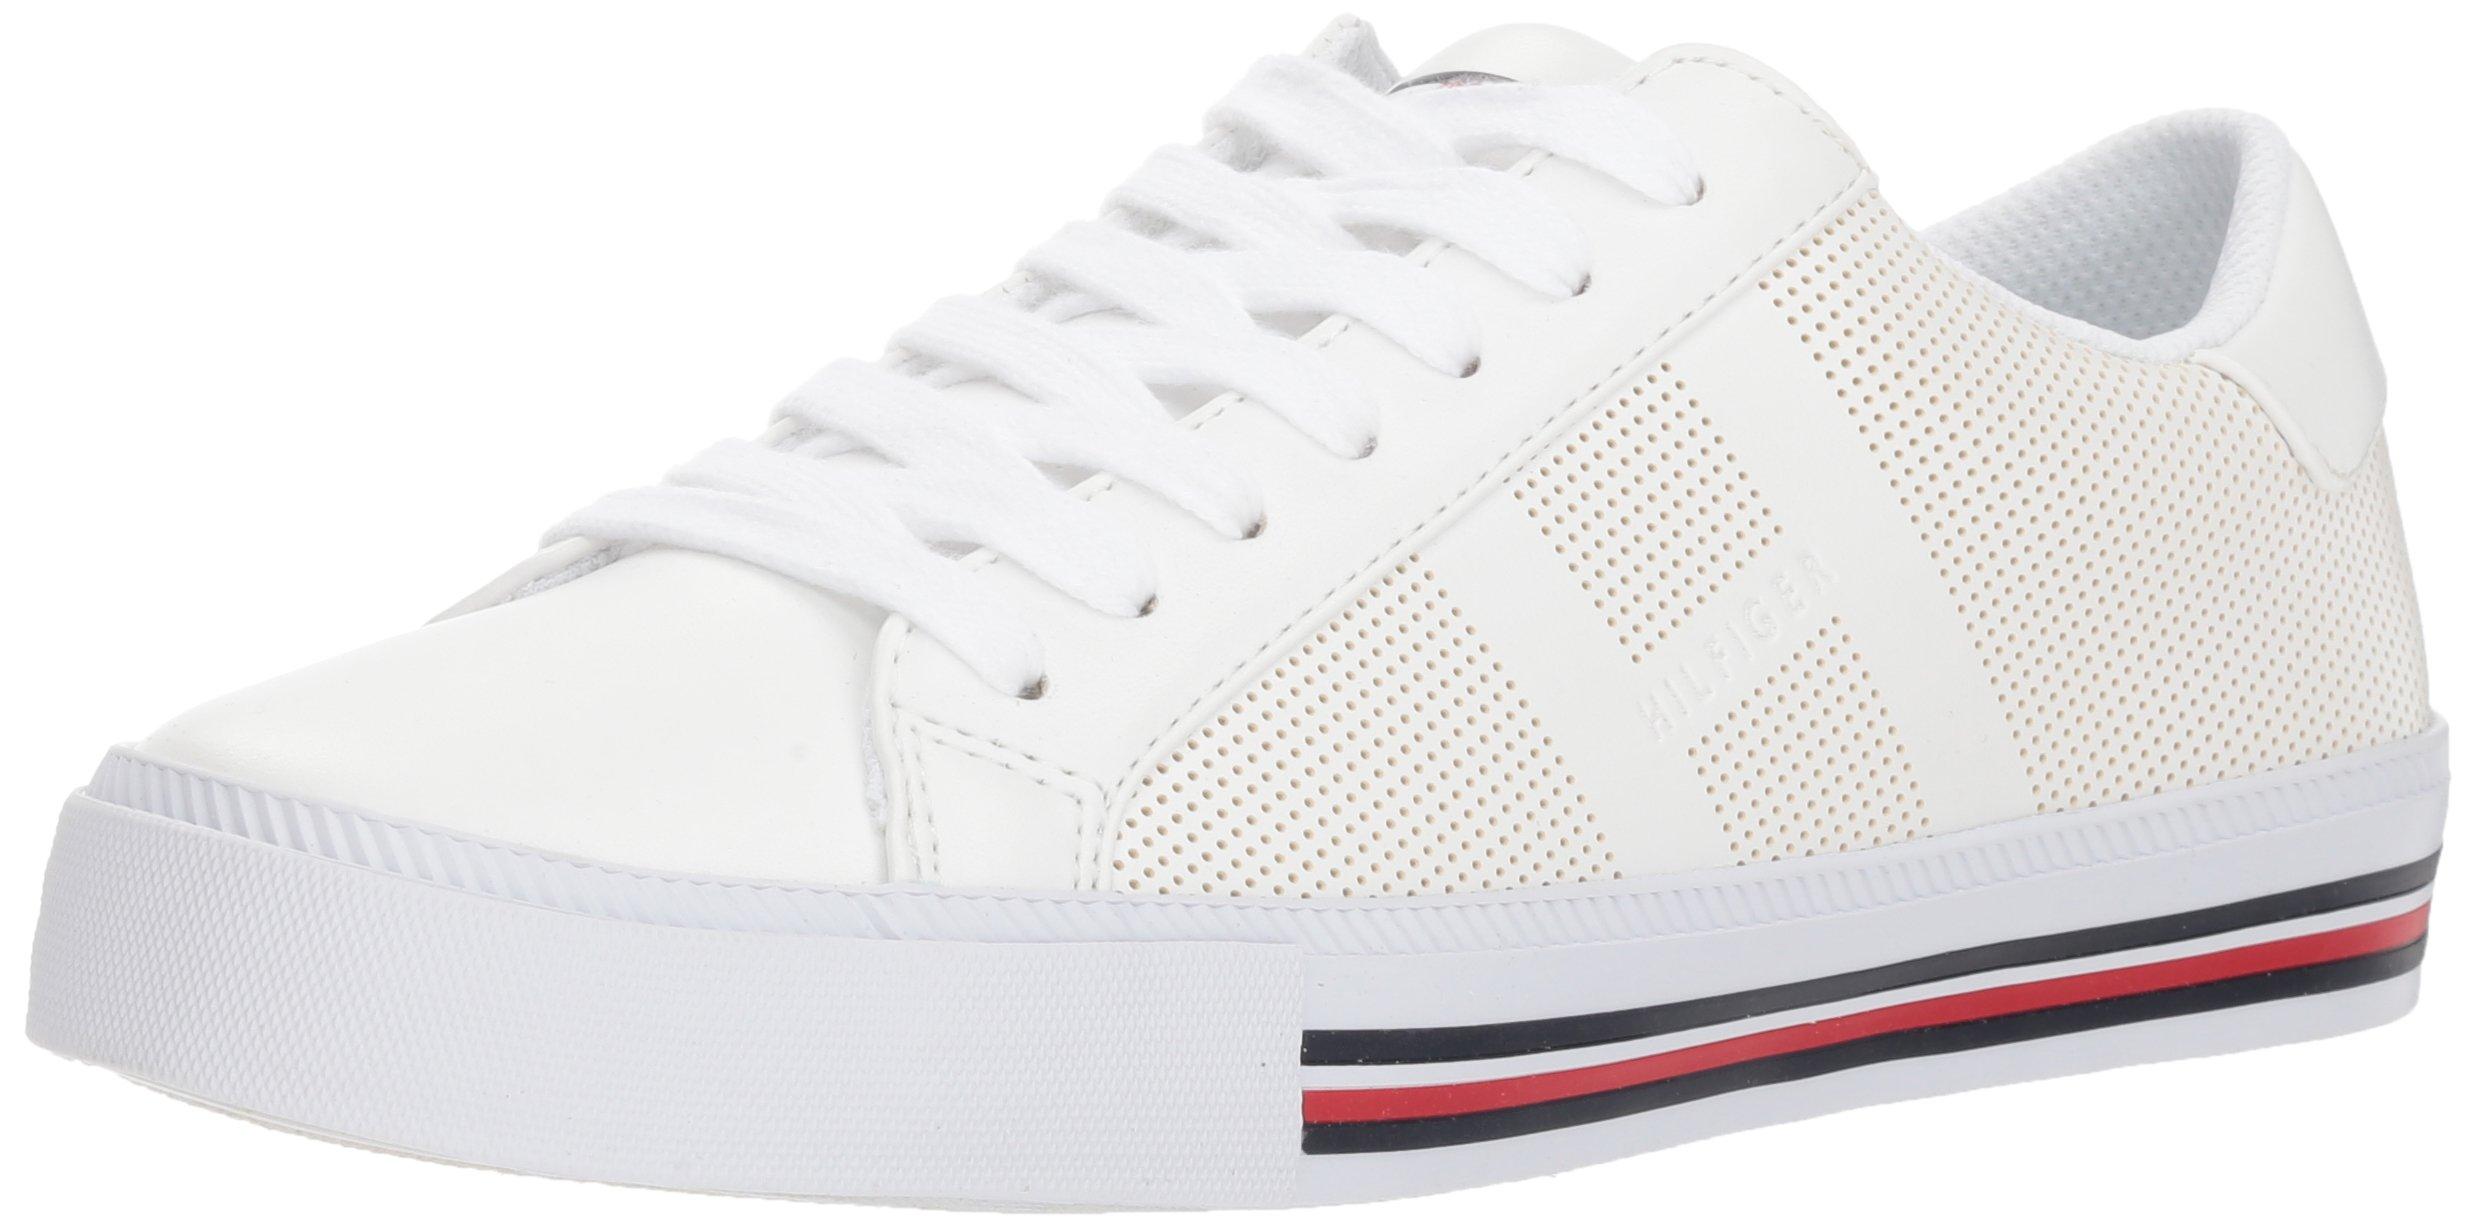 Tommy Hilfiger Tai Sneaker in White - Lyst